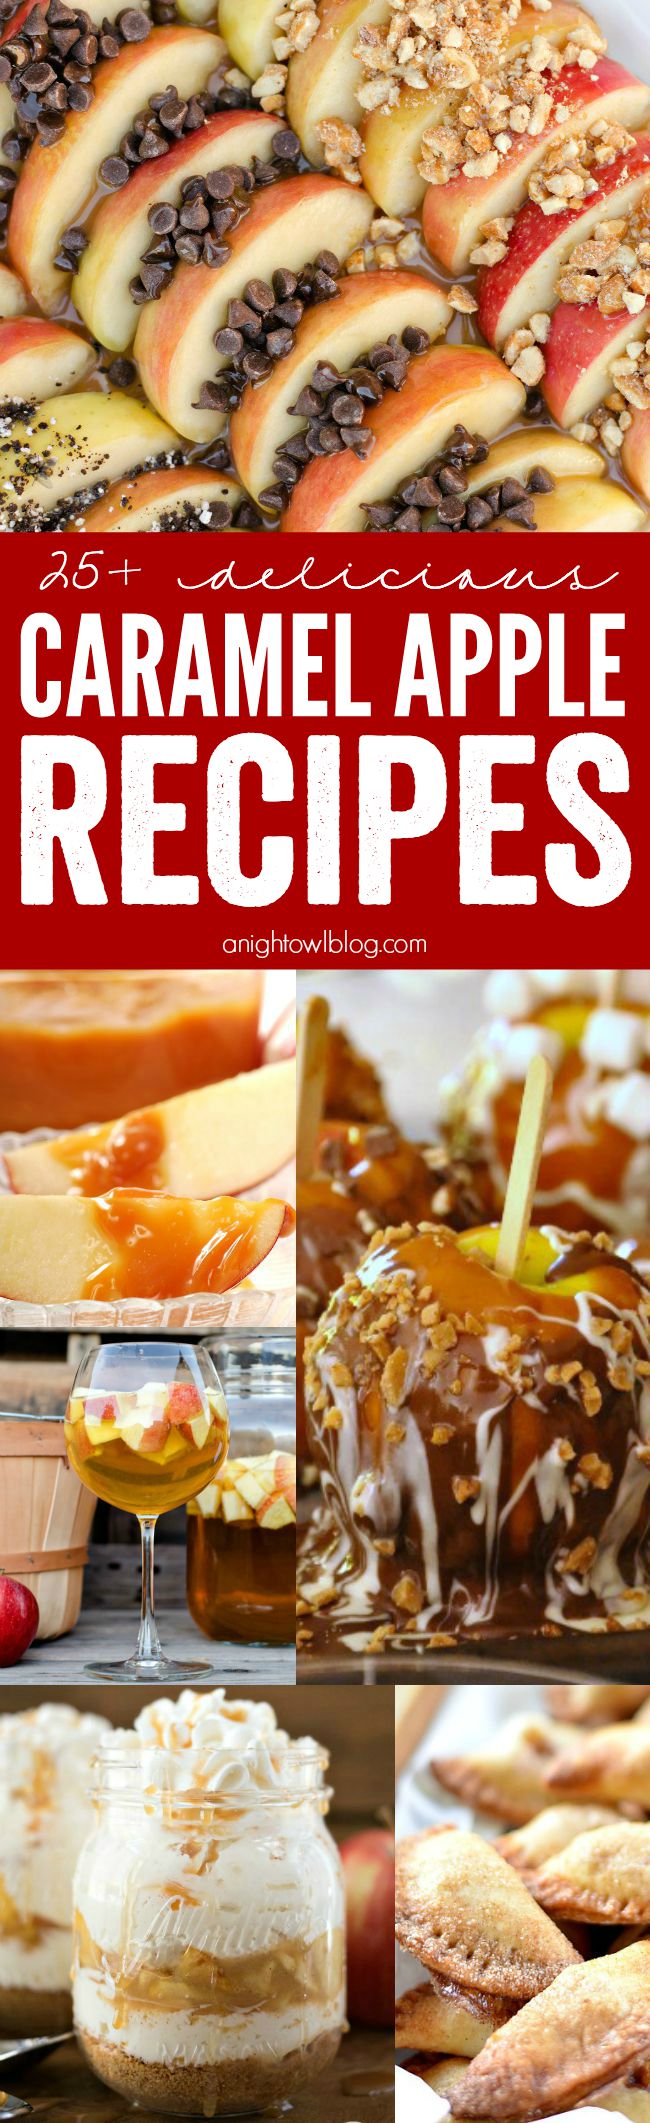 Over 25 amazing Caramel Apple Recipes! The perfect list for fall!